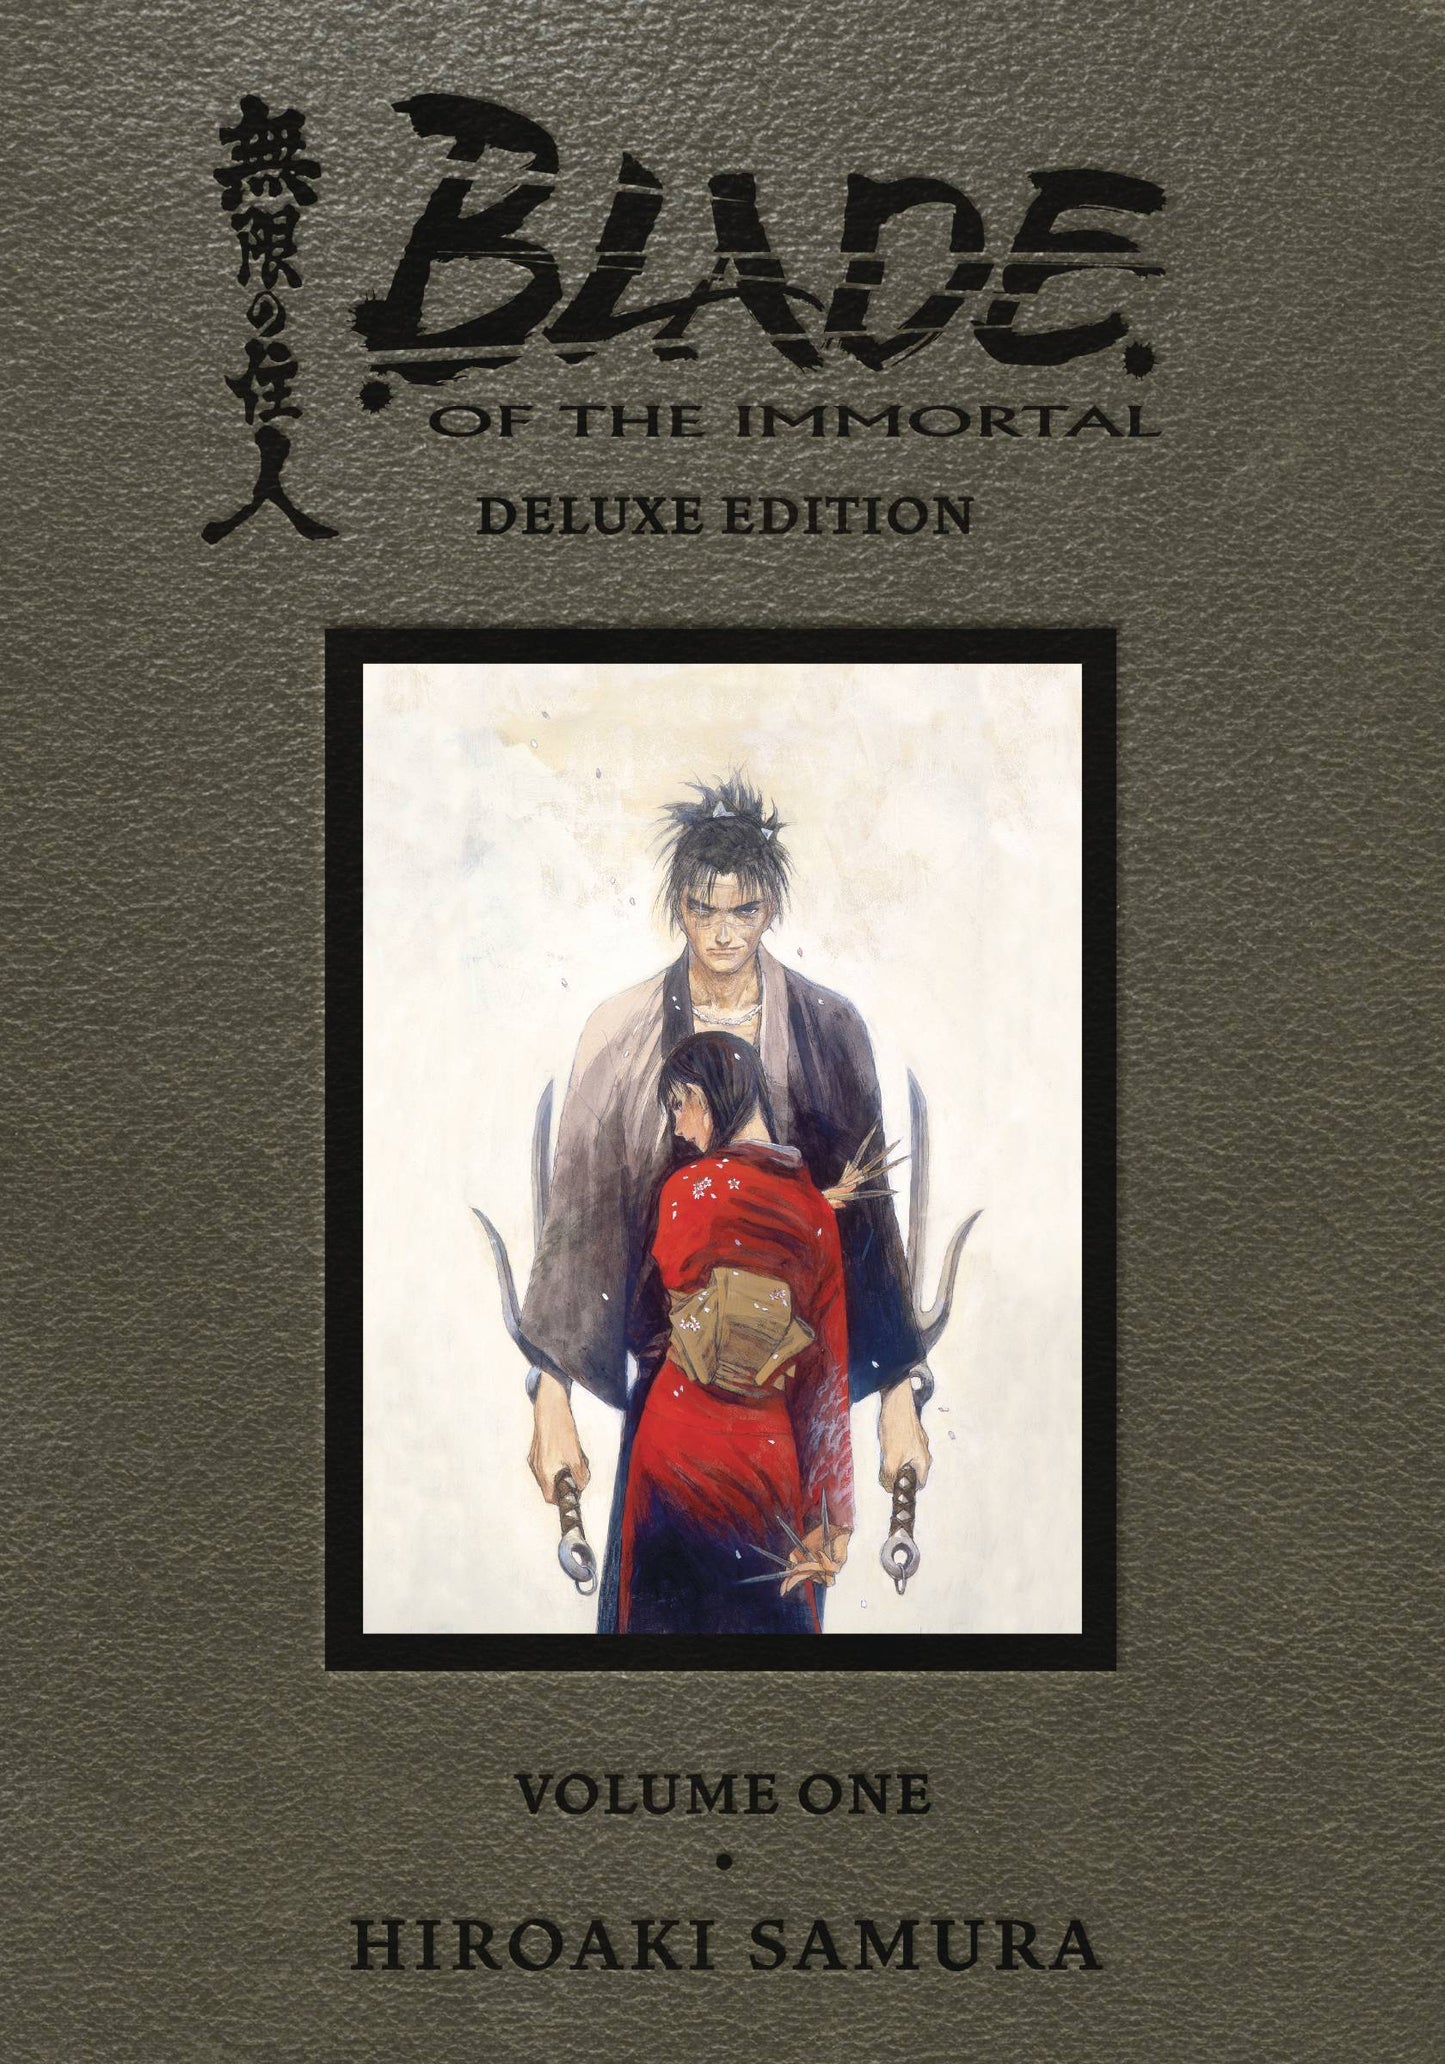 BLADE OF THE IMMORTAL DELUXE EDITION VOLUME 01 HC